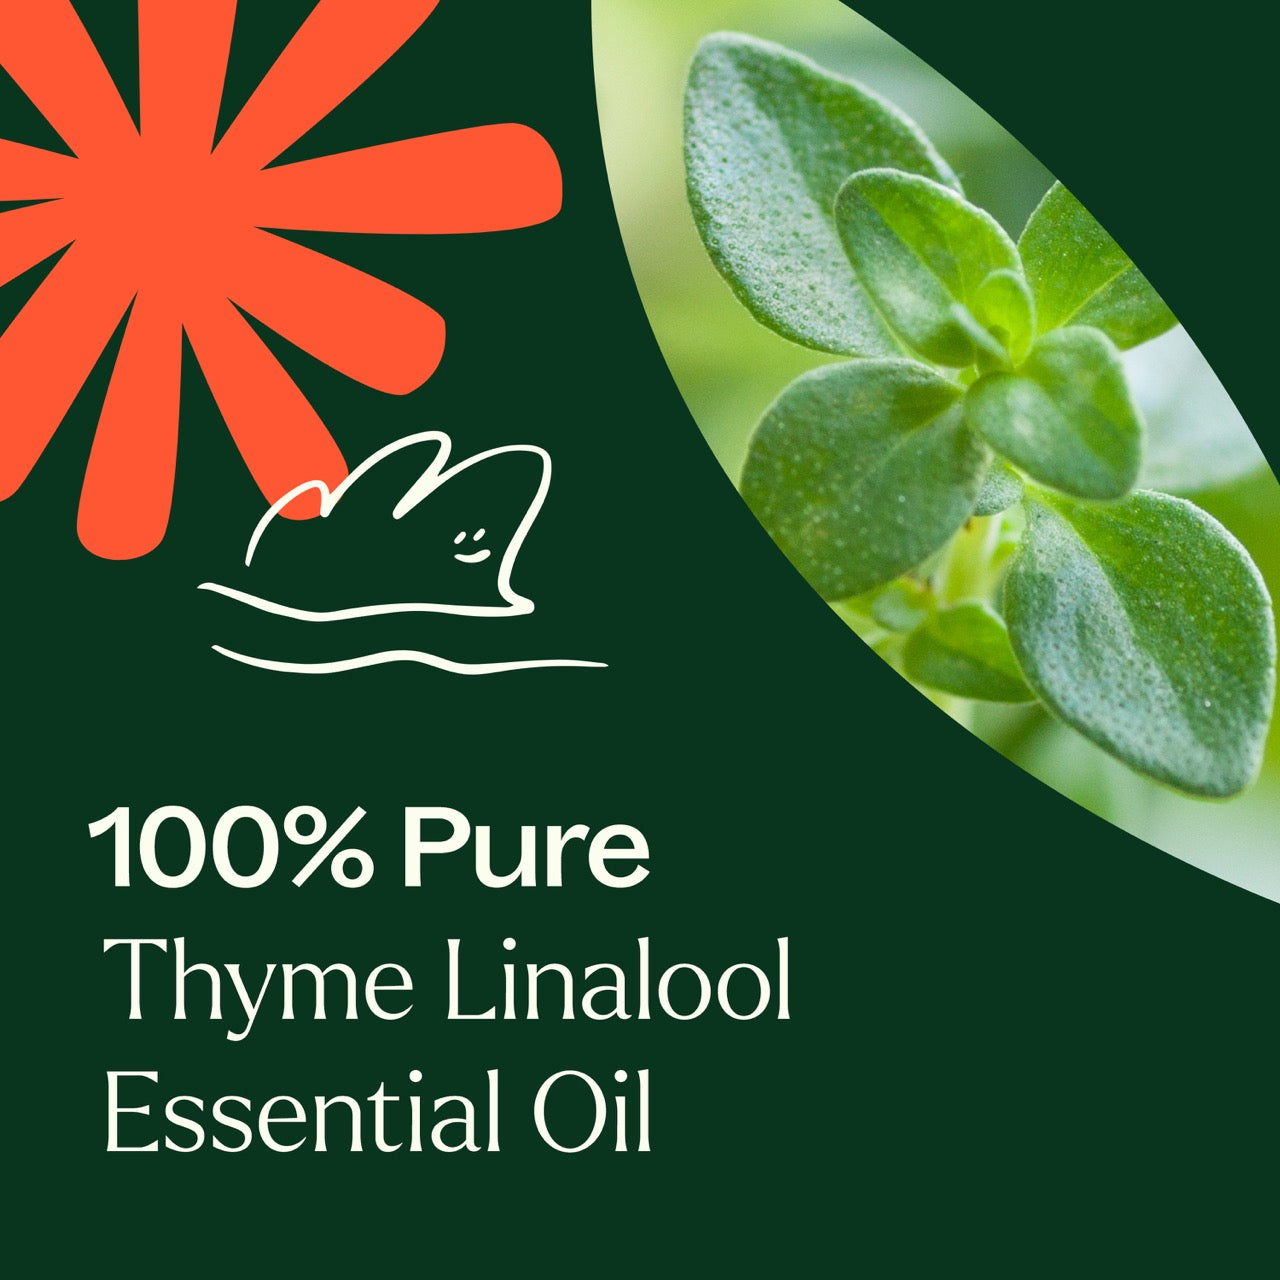 100% pure Thyme Linalool Essential Oil